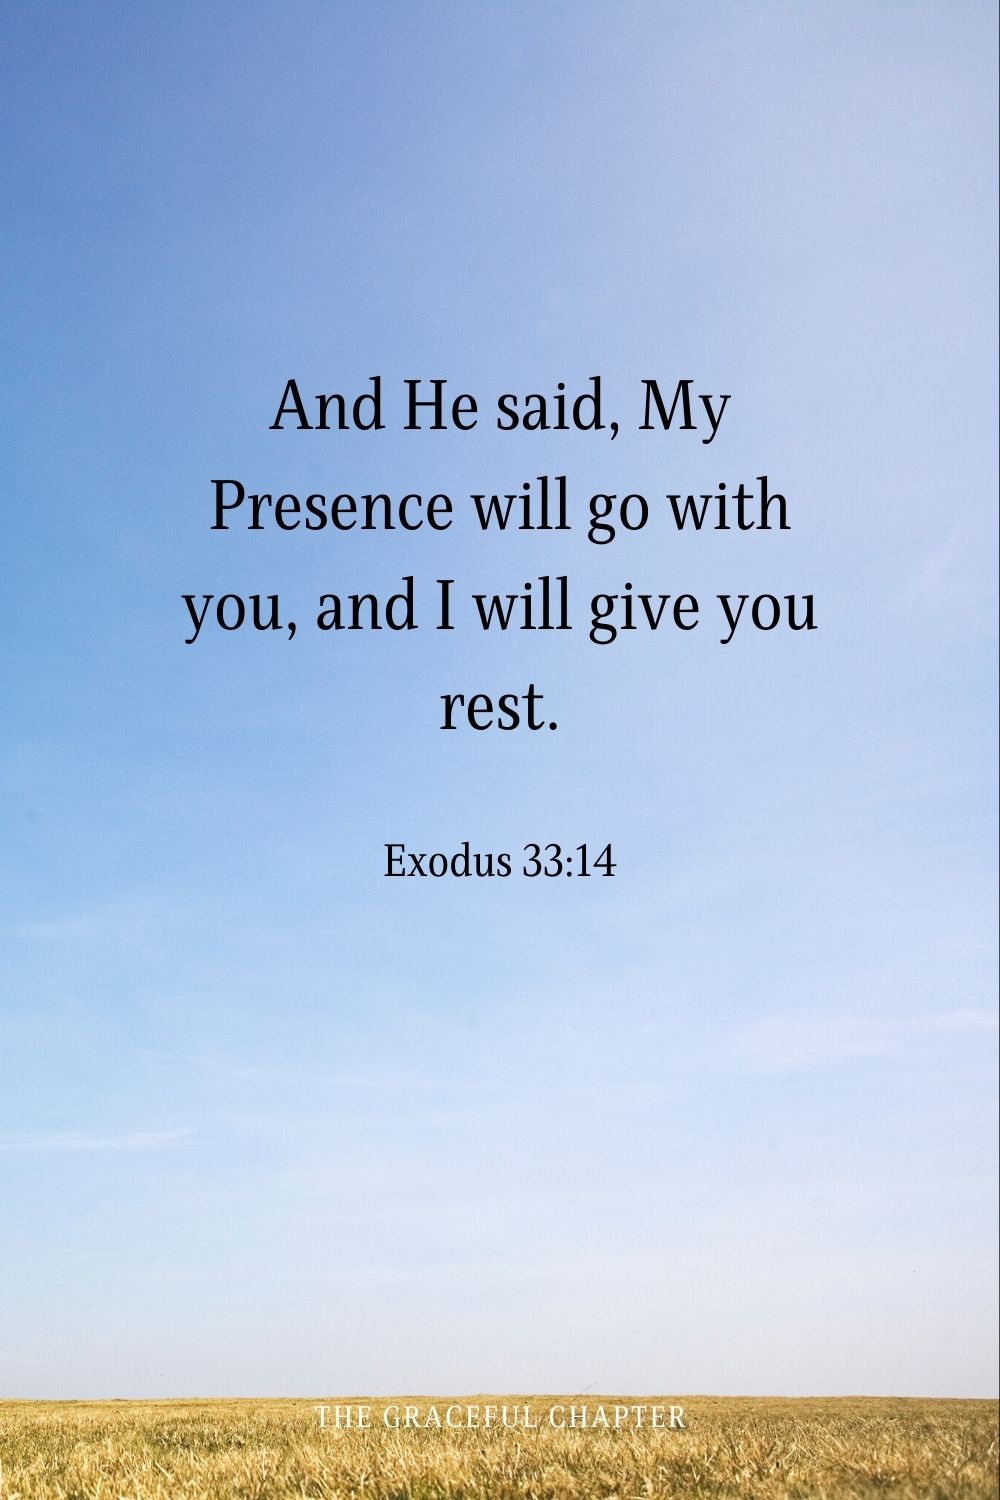 And He said, My Presence will go with you, and I will give you rest.